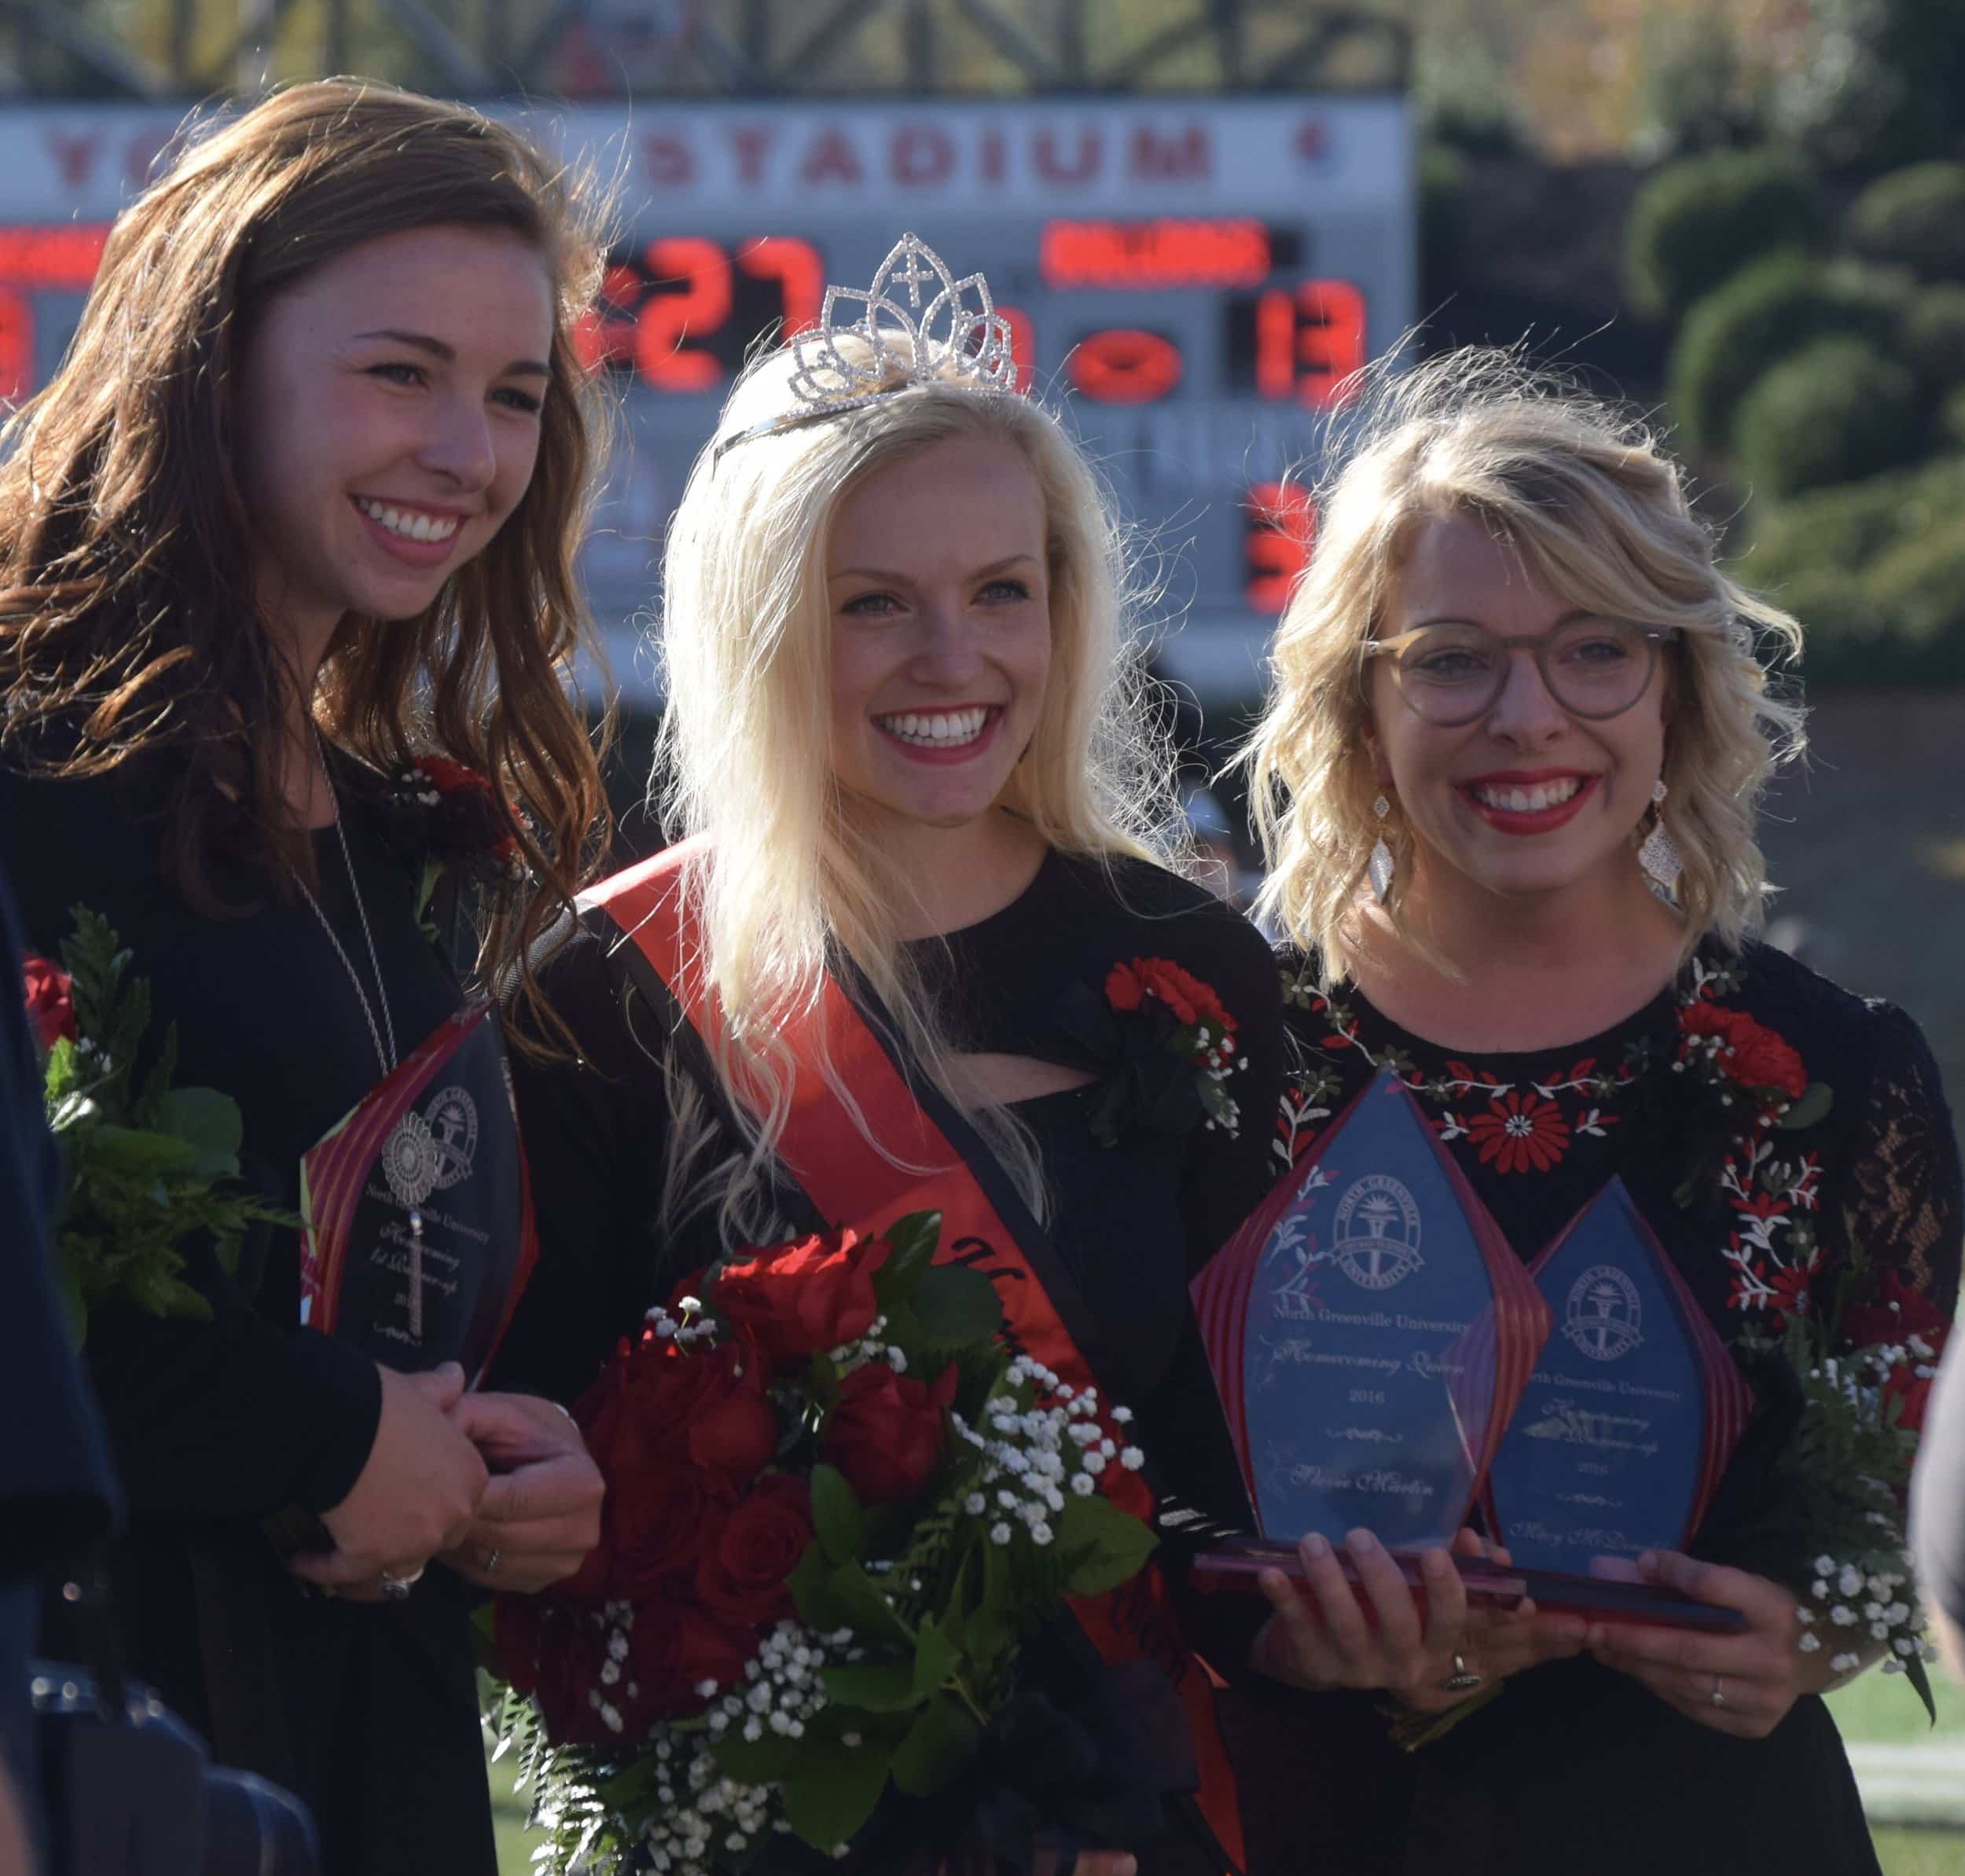 The Homecoming Queen poses with the first and second runners-up.